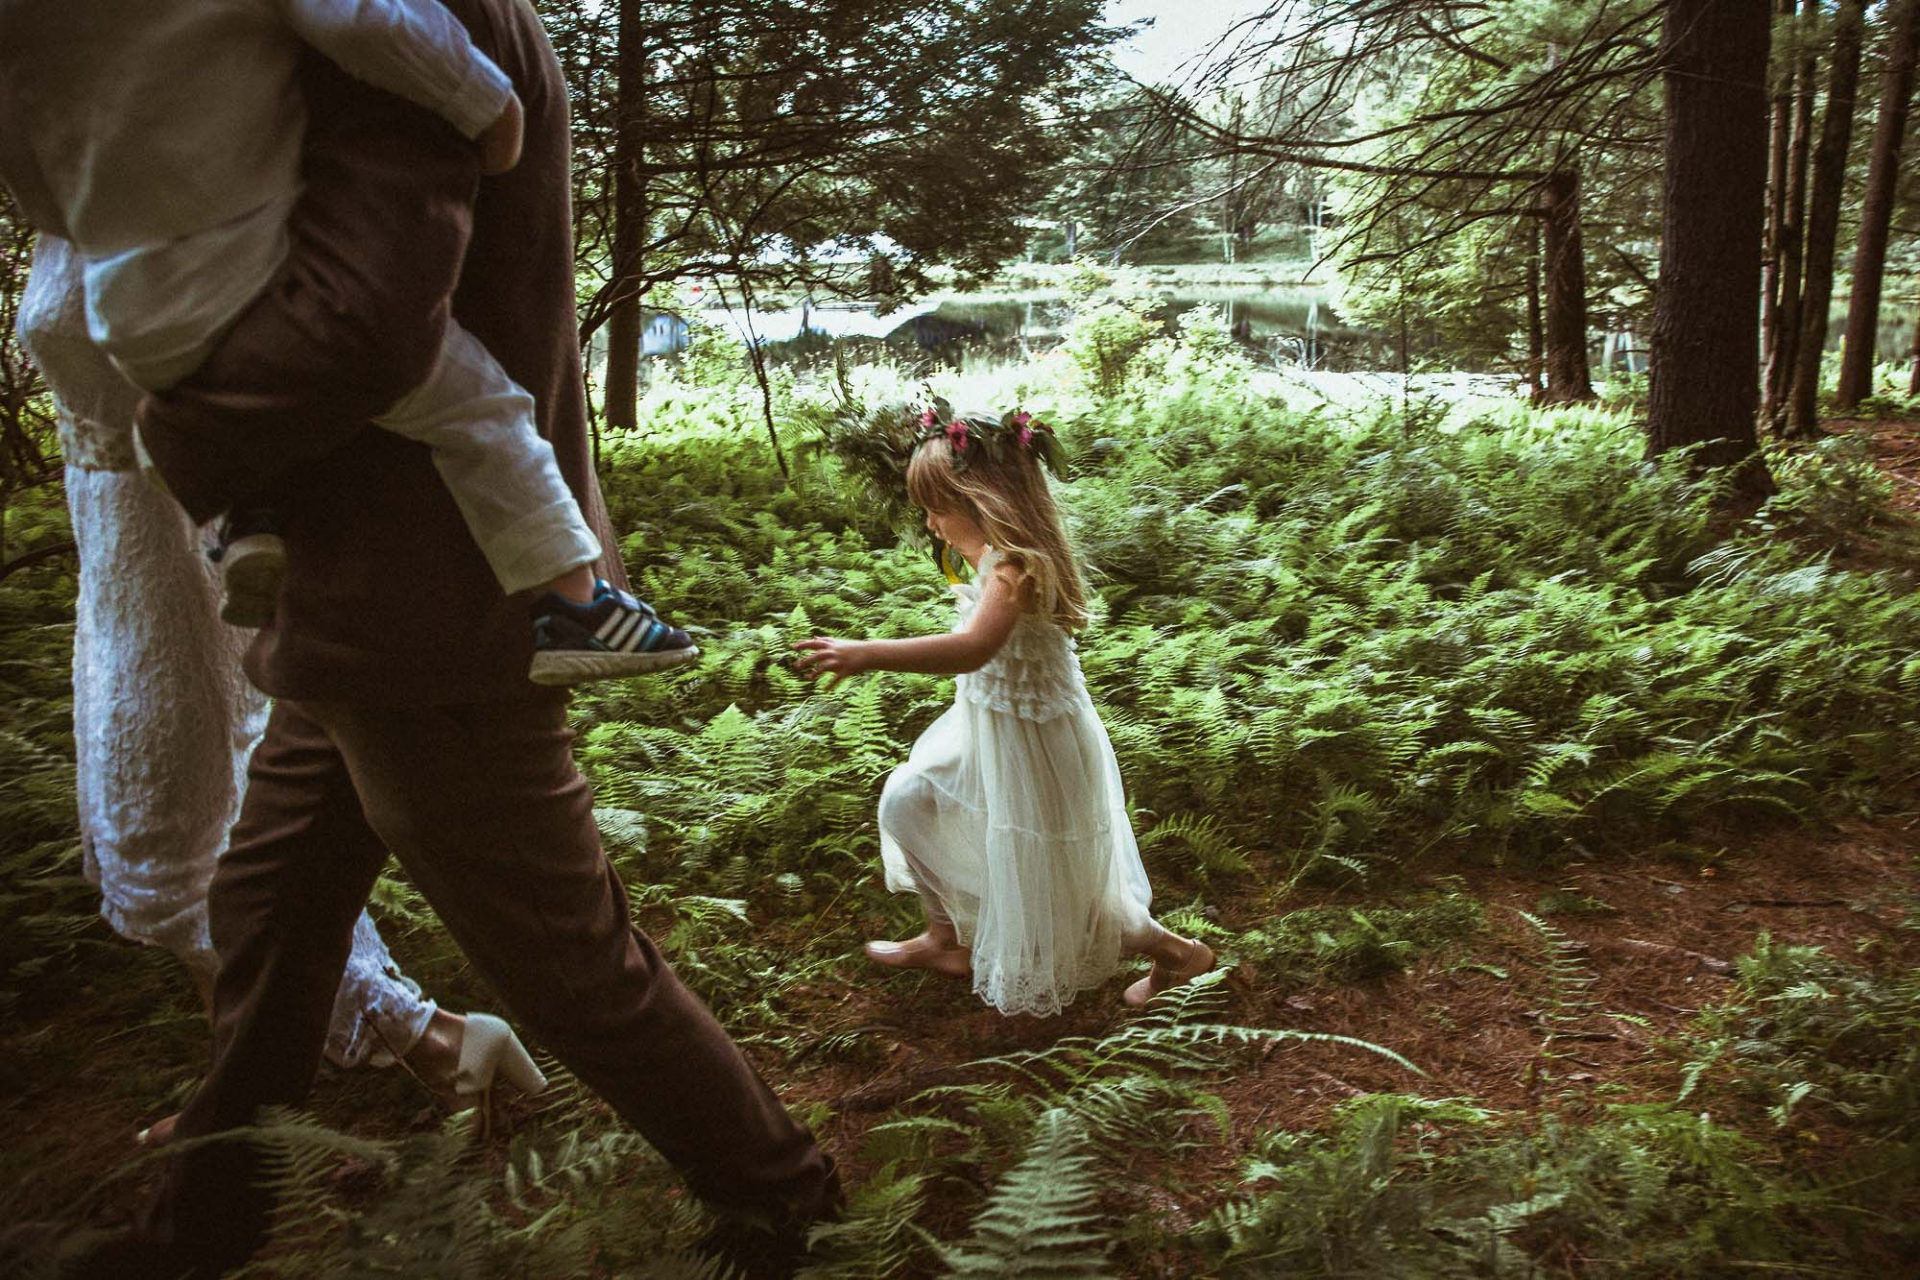 a small girl in a white dress and flower crown walks through the green woods behind a bride and a groom carrying another small child